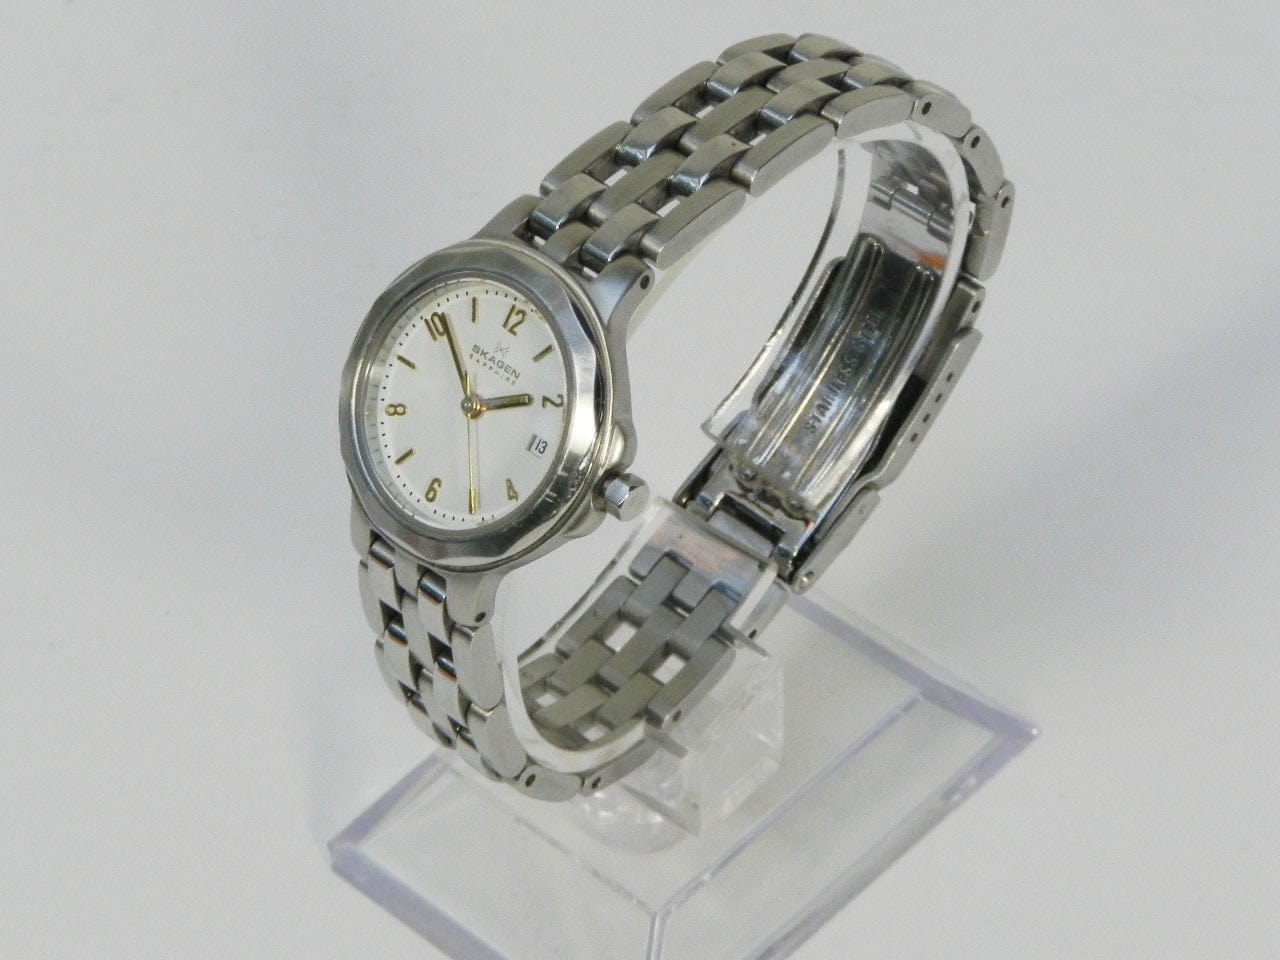 I Like Mikes Mid Century Modern Clock Skagen Sapphire Women's Round Silvertone Watch, White Face, Gold Numbers